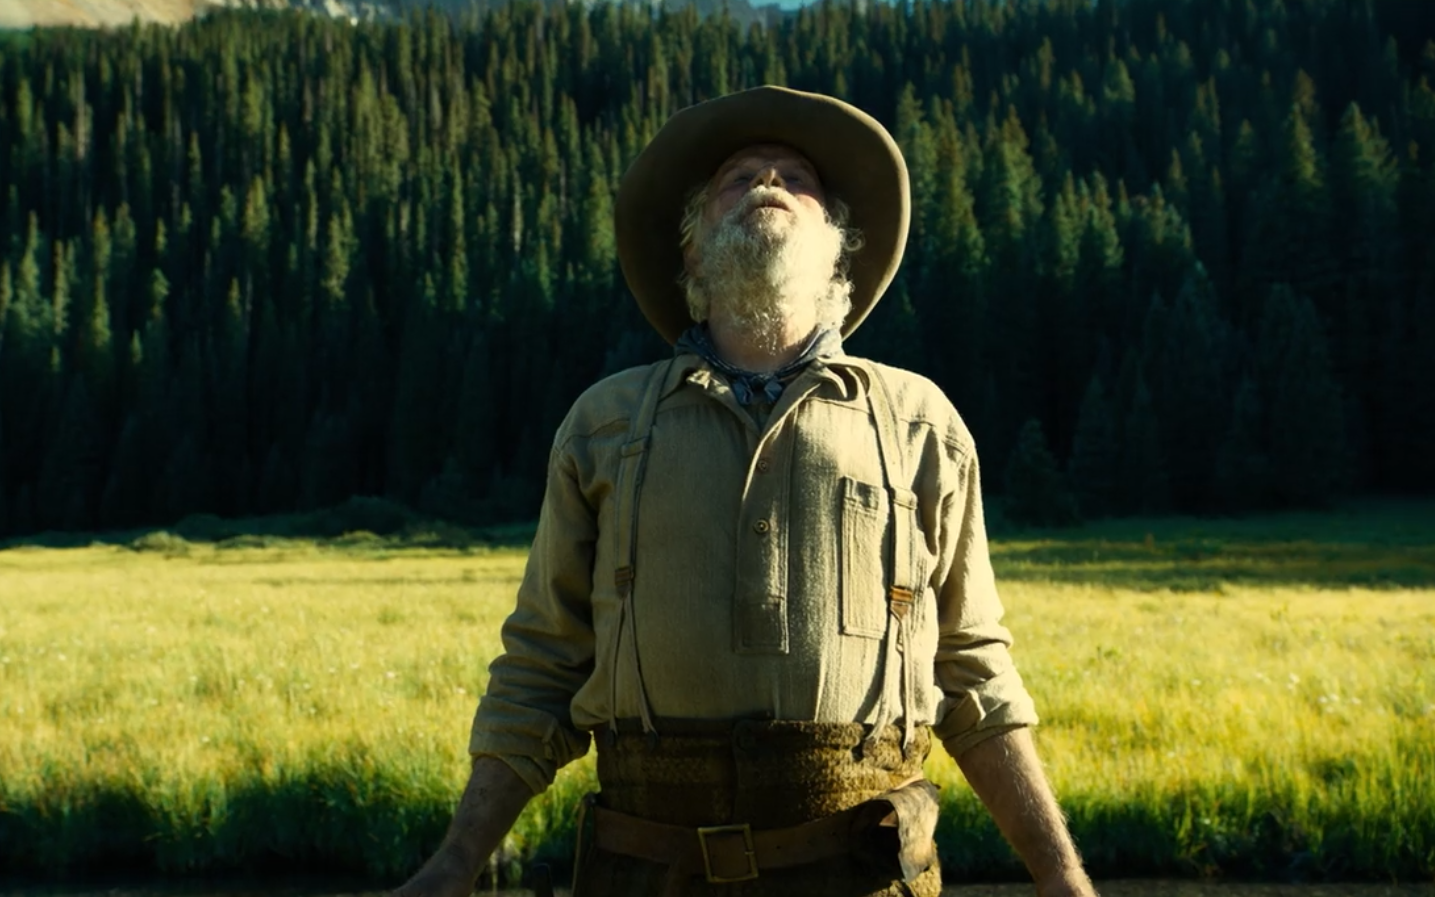 Review: The Coen Brothers' “The Ballad of Buster Scruggs” Is Six